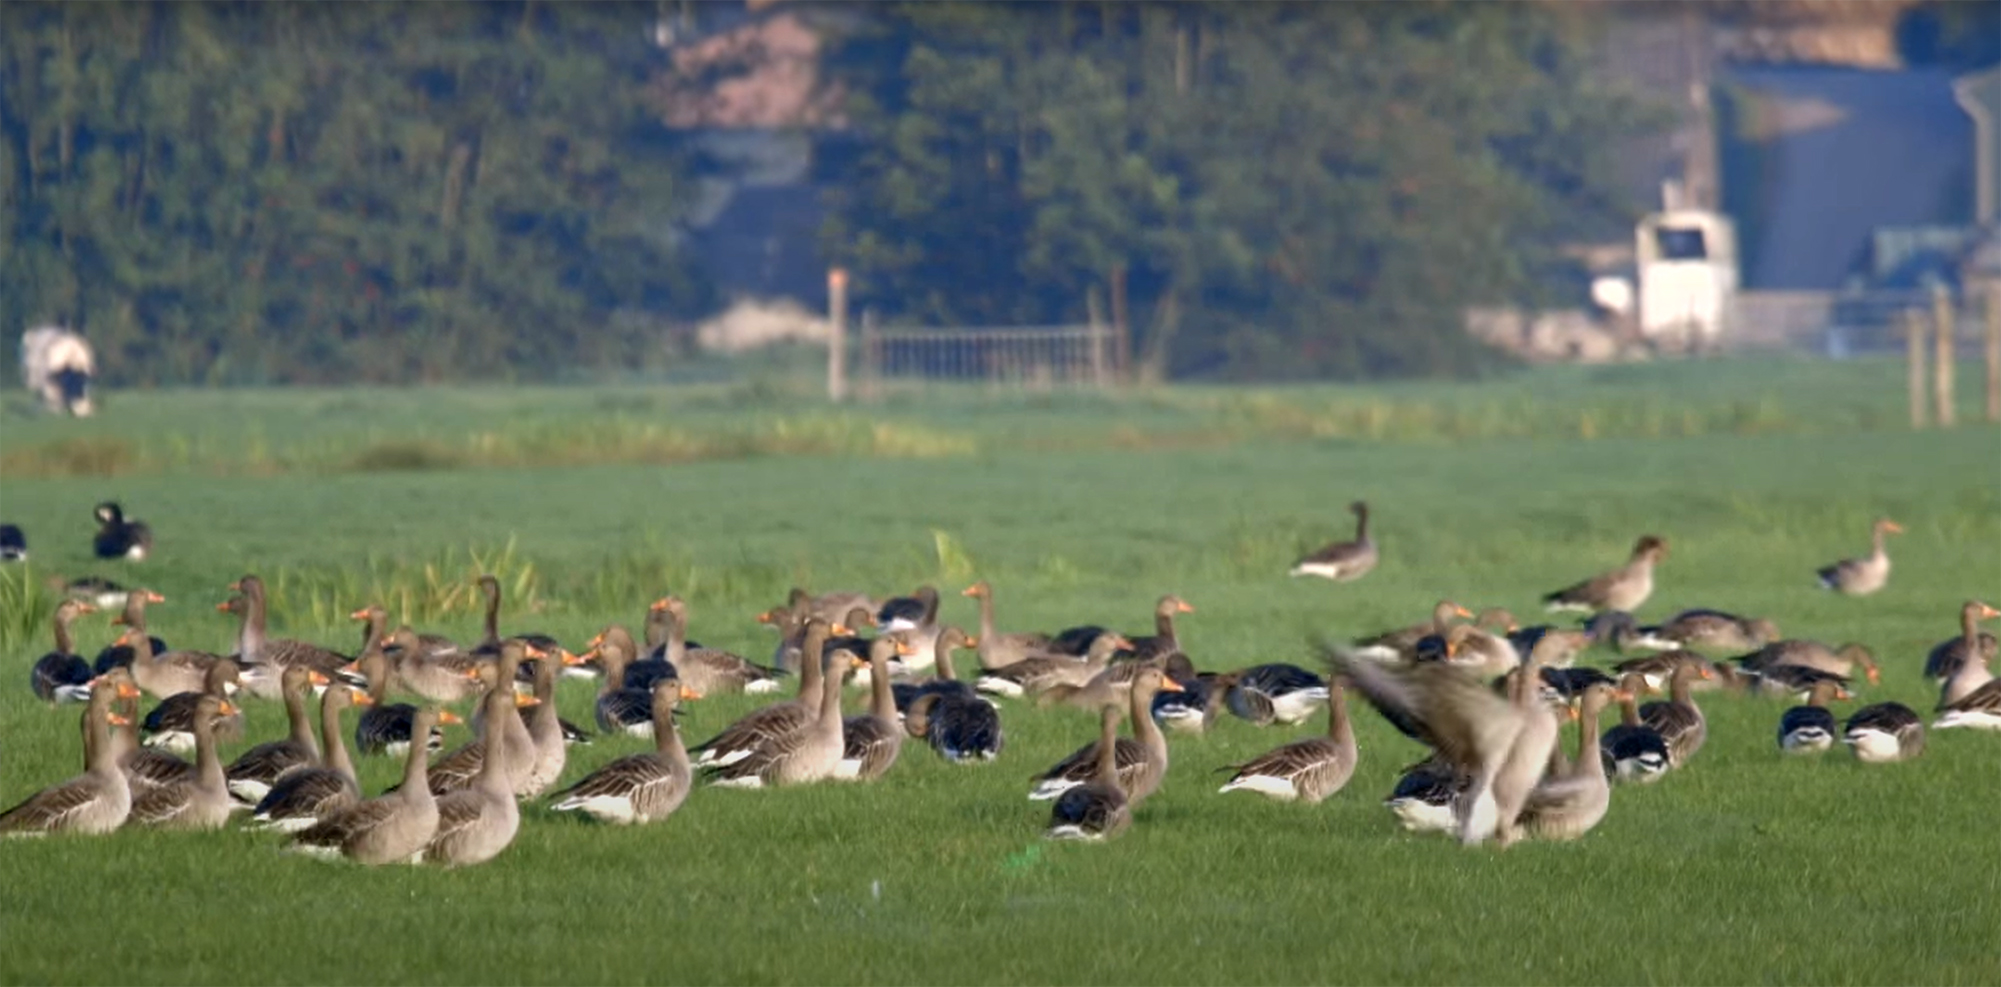 Green laser pointer is a very effective tool for birds(and goose) dispersal